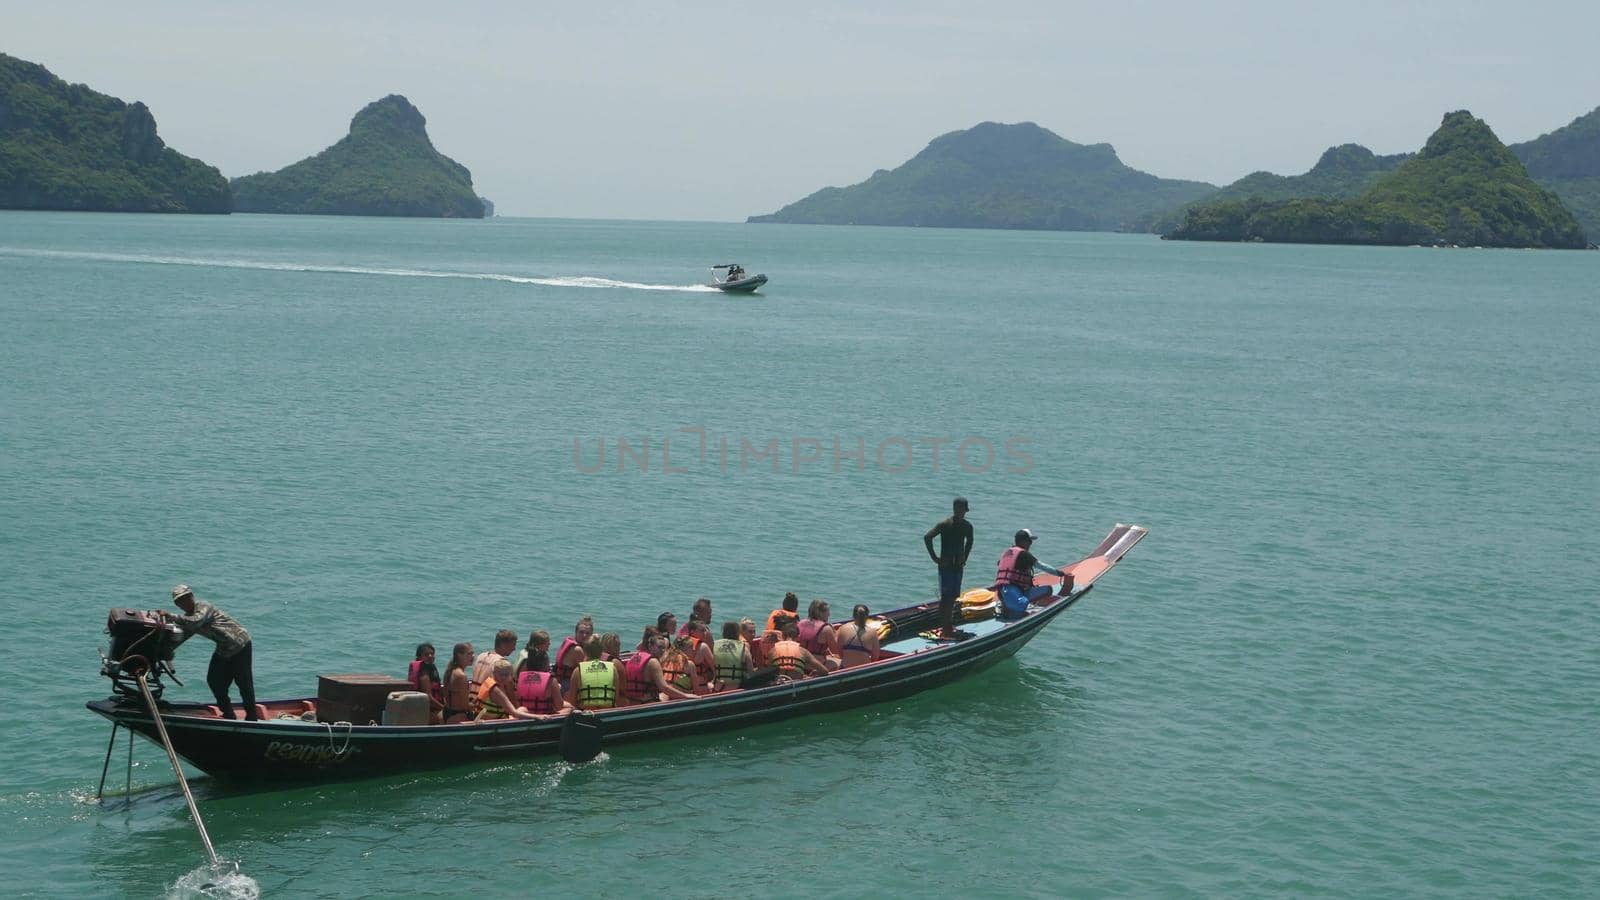 ANG THONG MARINE PARK, SAMUI, THAILAND - 9 JUNE 2019: Group of Islands in ocean near touristic paradise tropical resort. Idyllic turquoise sea with boat with tourists. Travel vacation holiday concept by DogoraSun